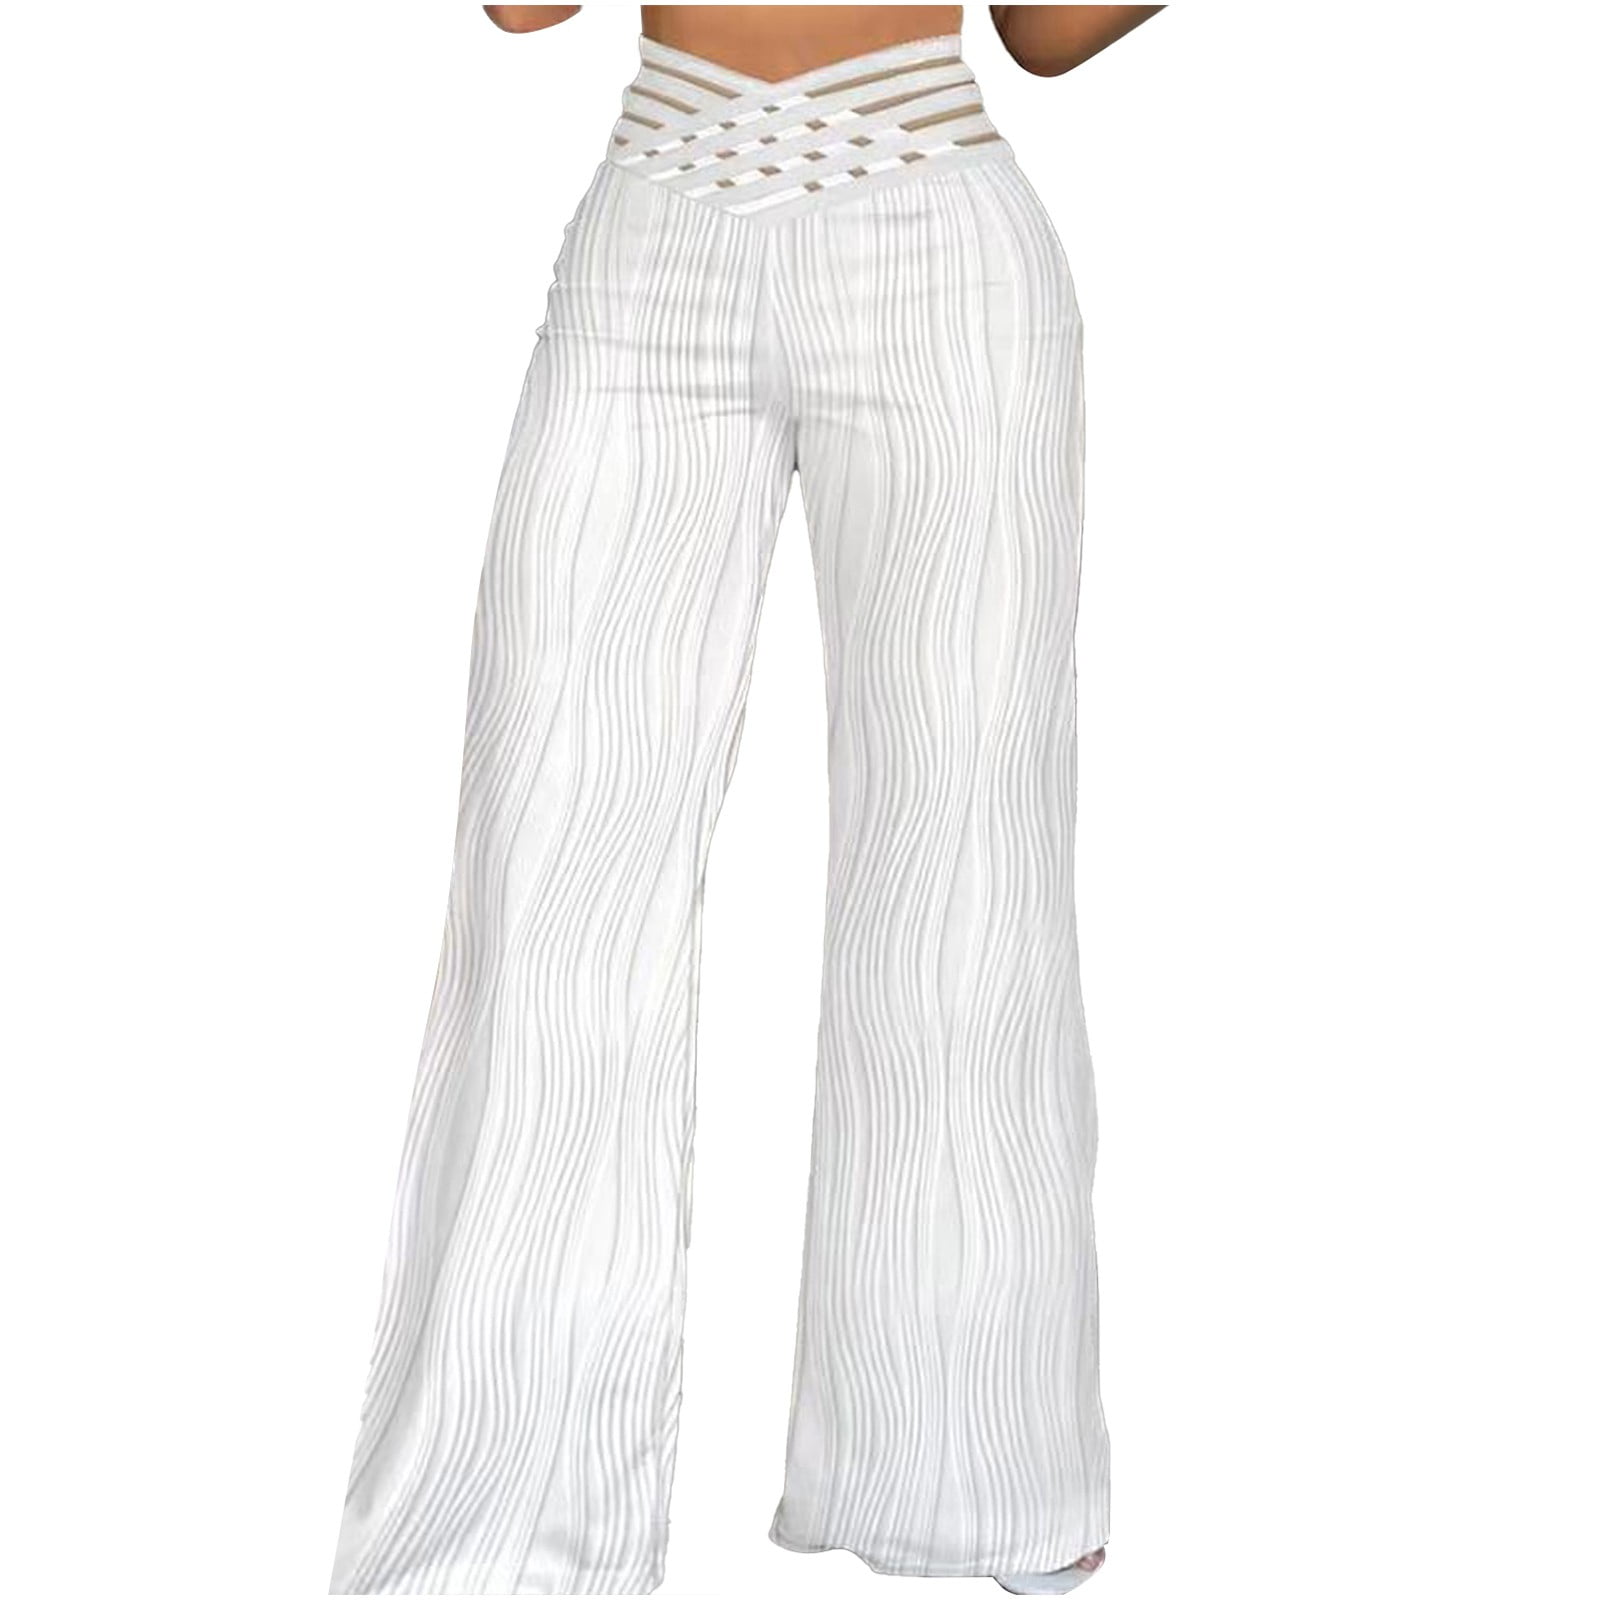 ASFGIMUJ Women Solid Casual Hollow Mesh High Waisted Wide Leg Pants ...